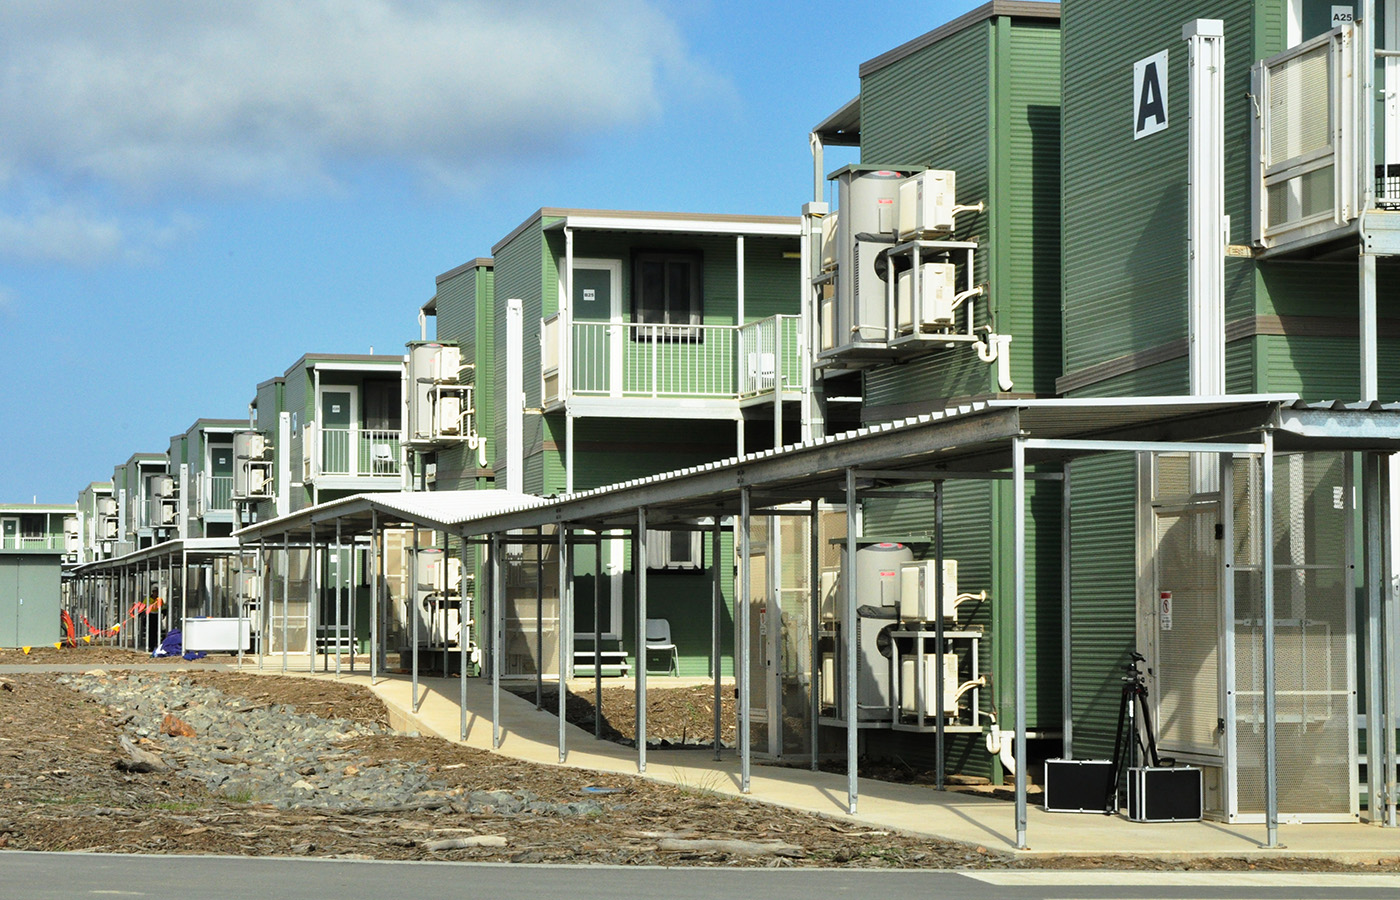 Curtis Island Accommodation Project